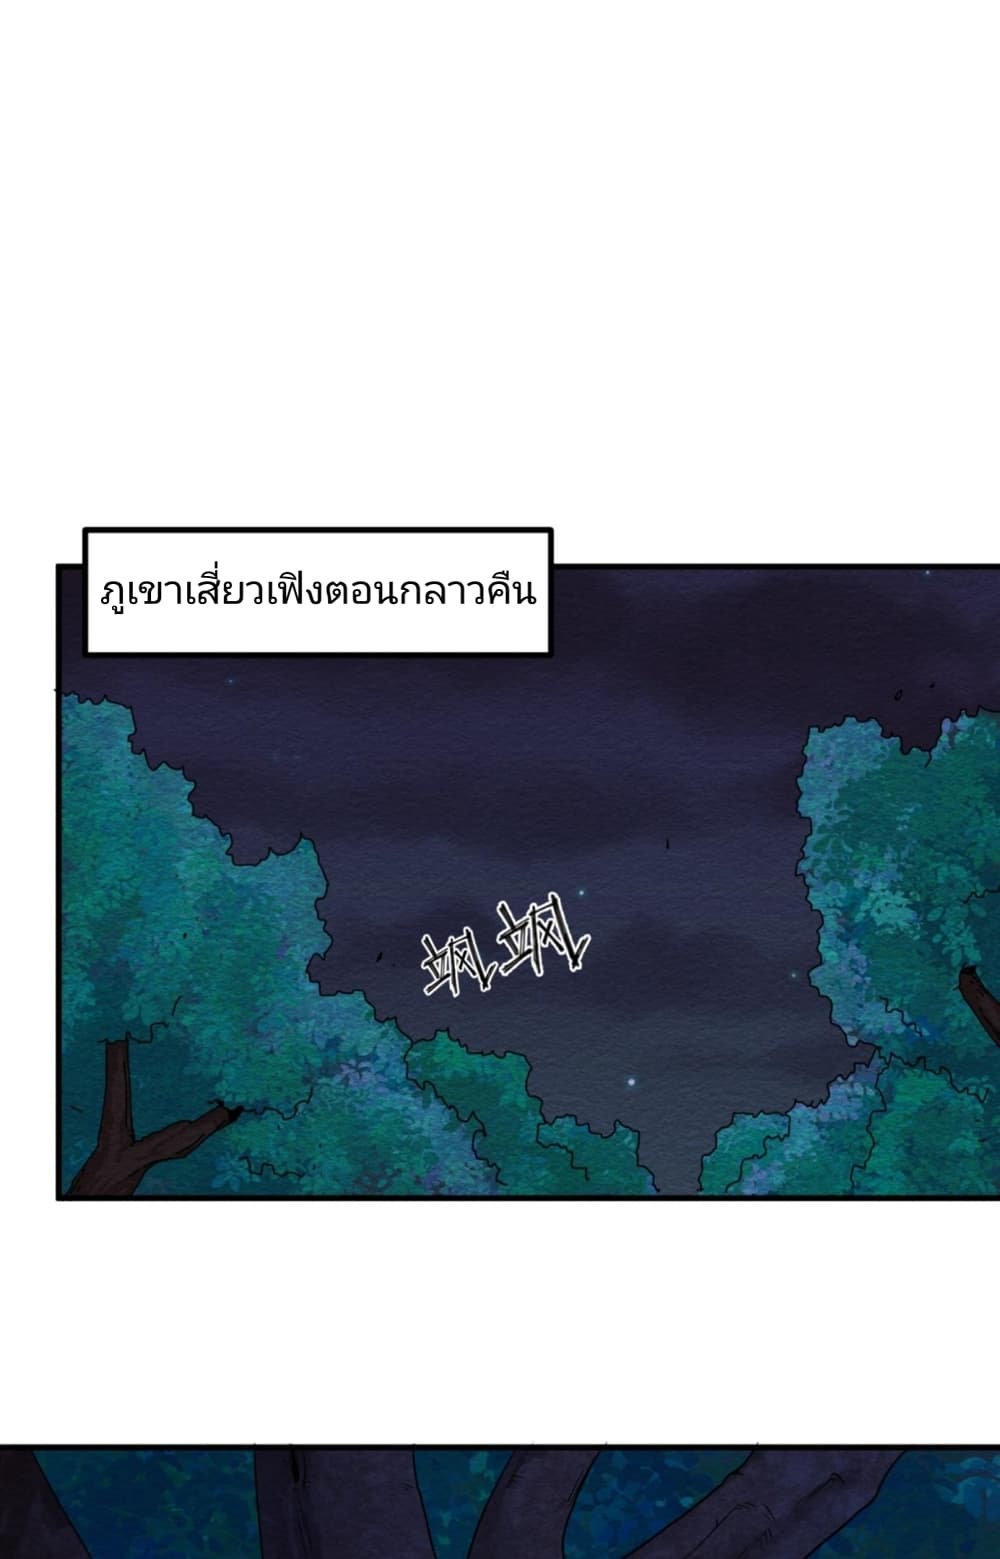 The Age of Ghost Spirits à¸à¸­à¸à¸à¸µà¹ 10 (29)